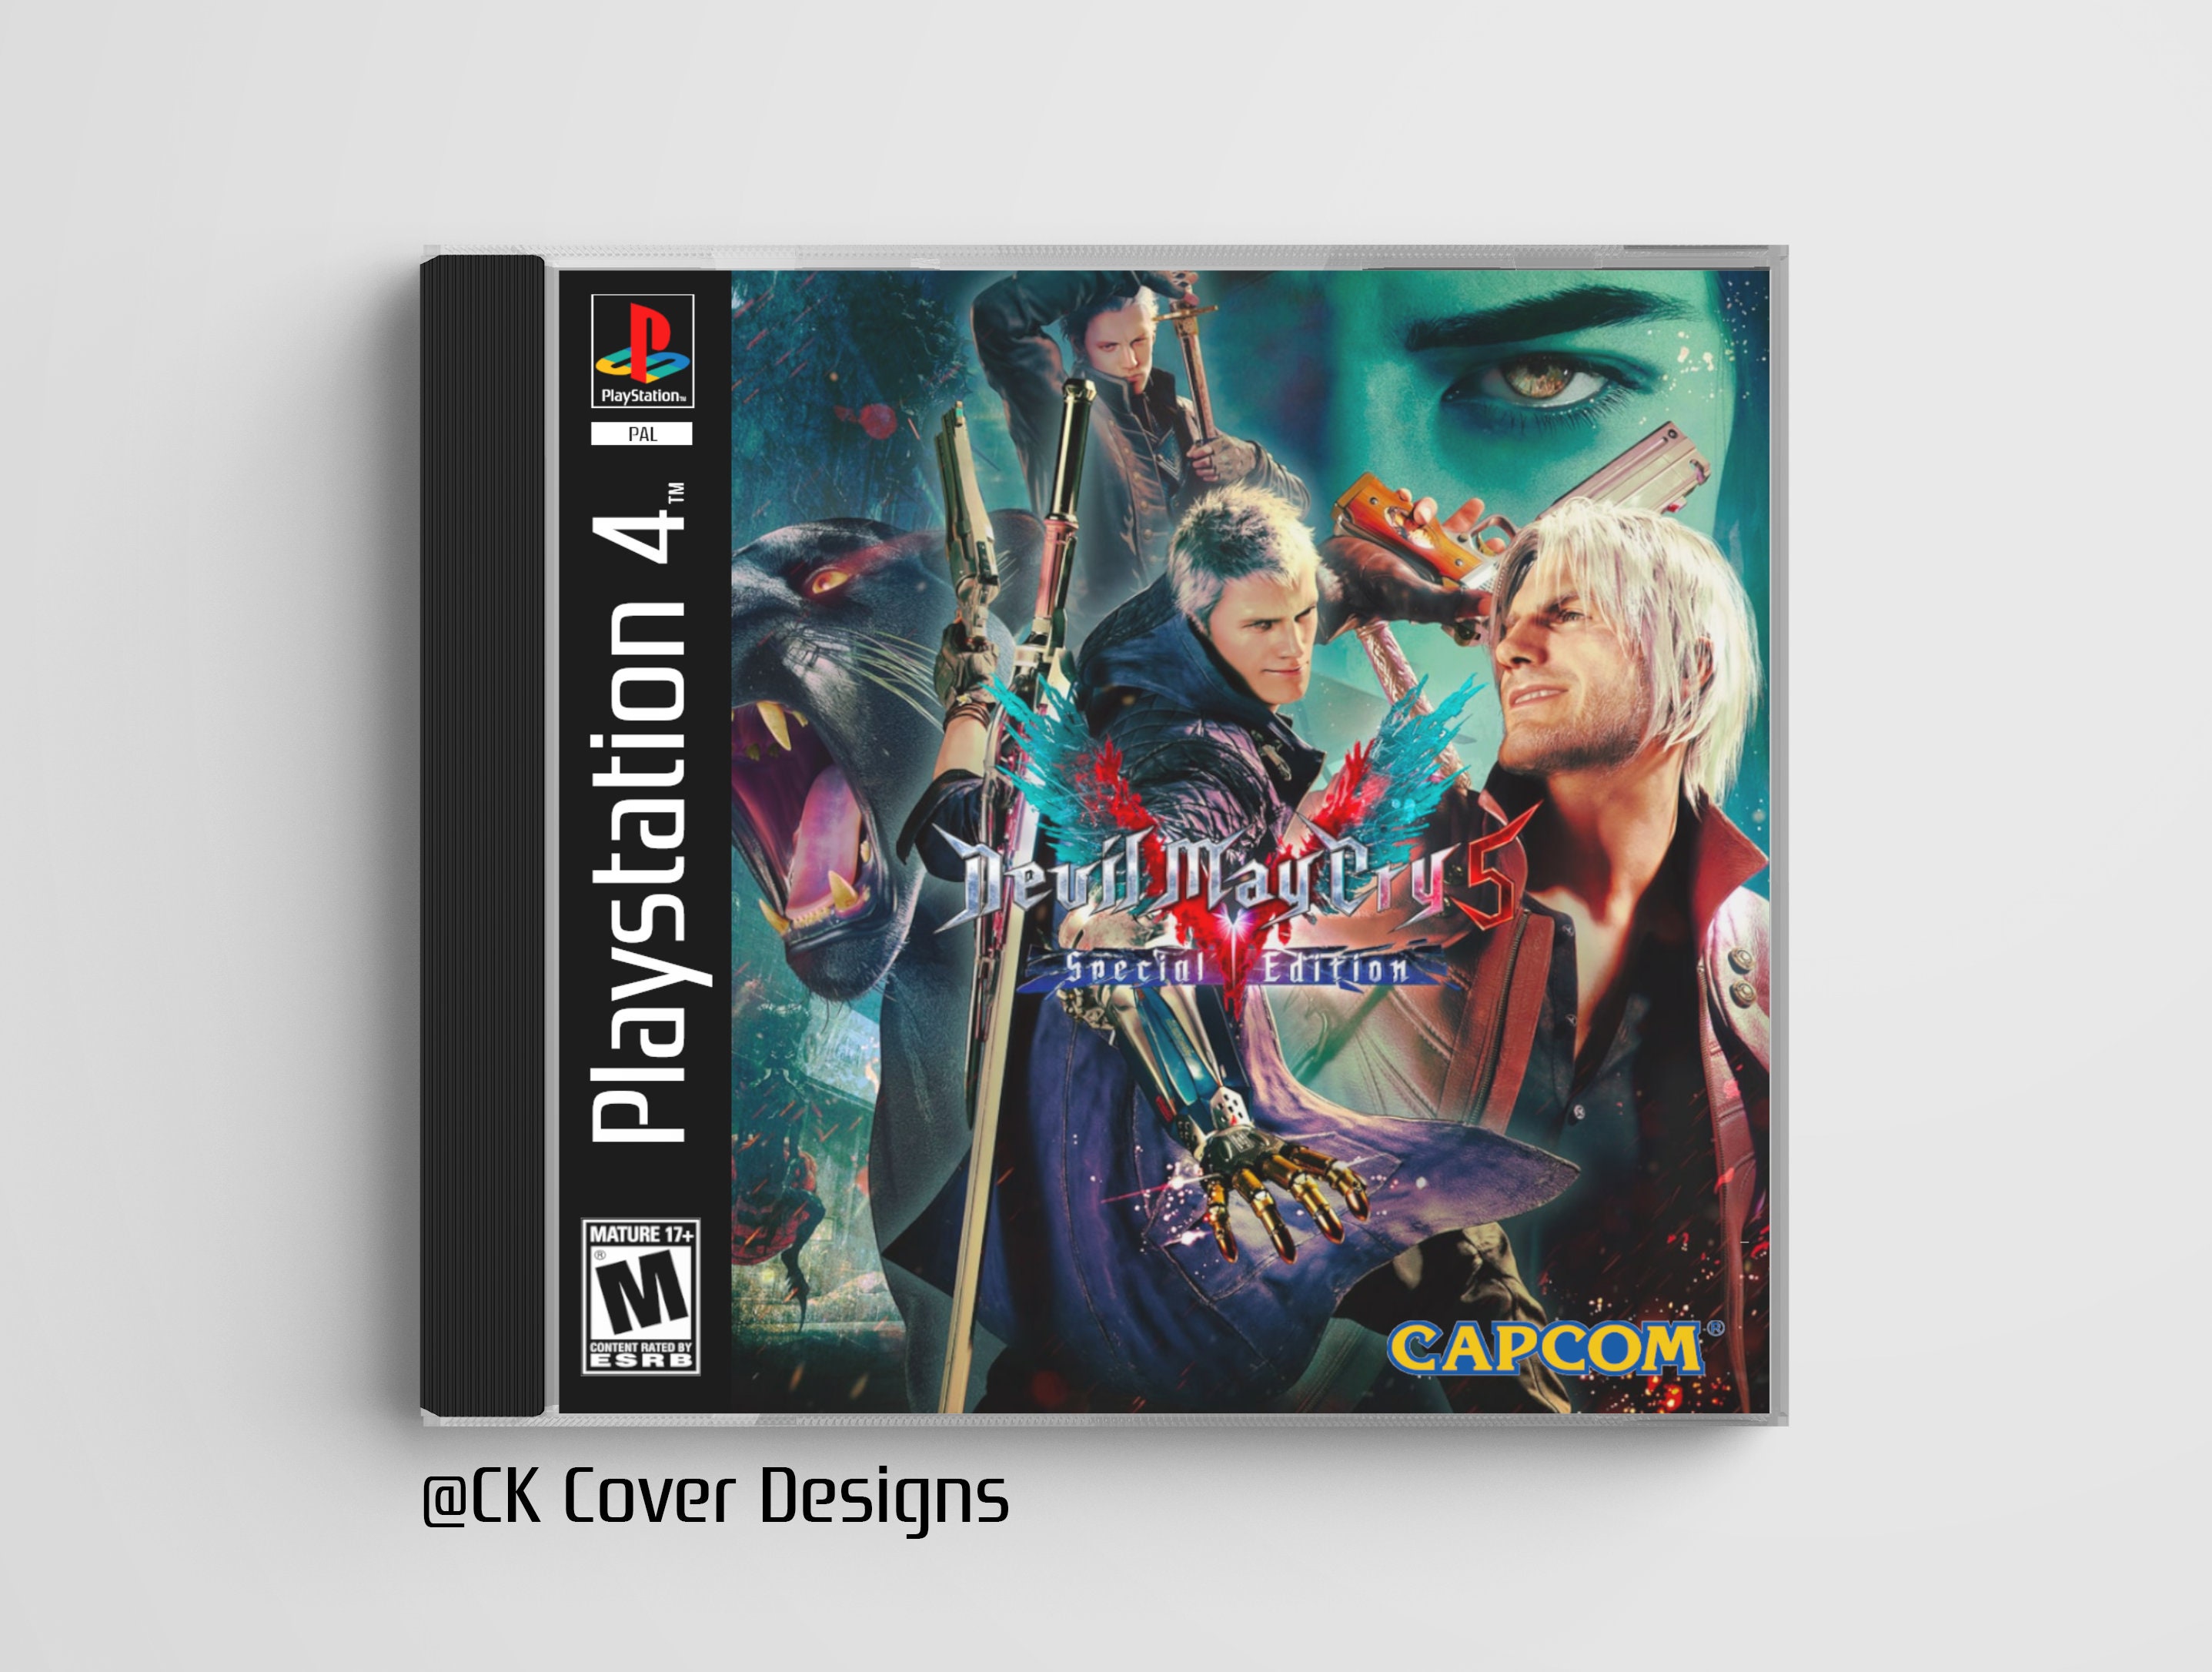 Devil May Cry [5th Anniversary Collection] Prices Playstation 2